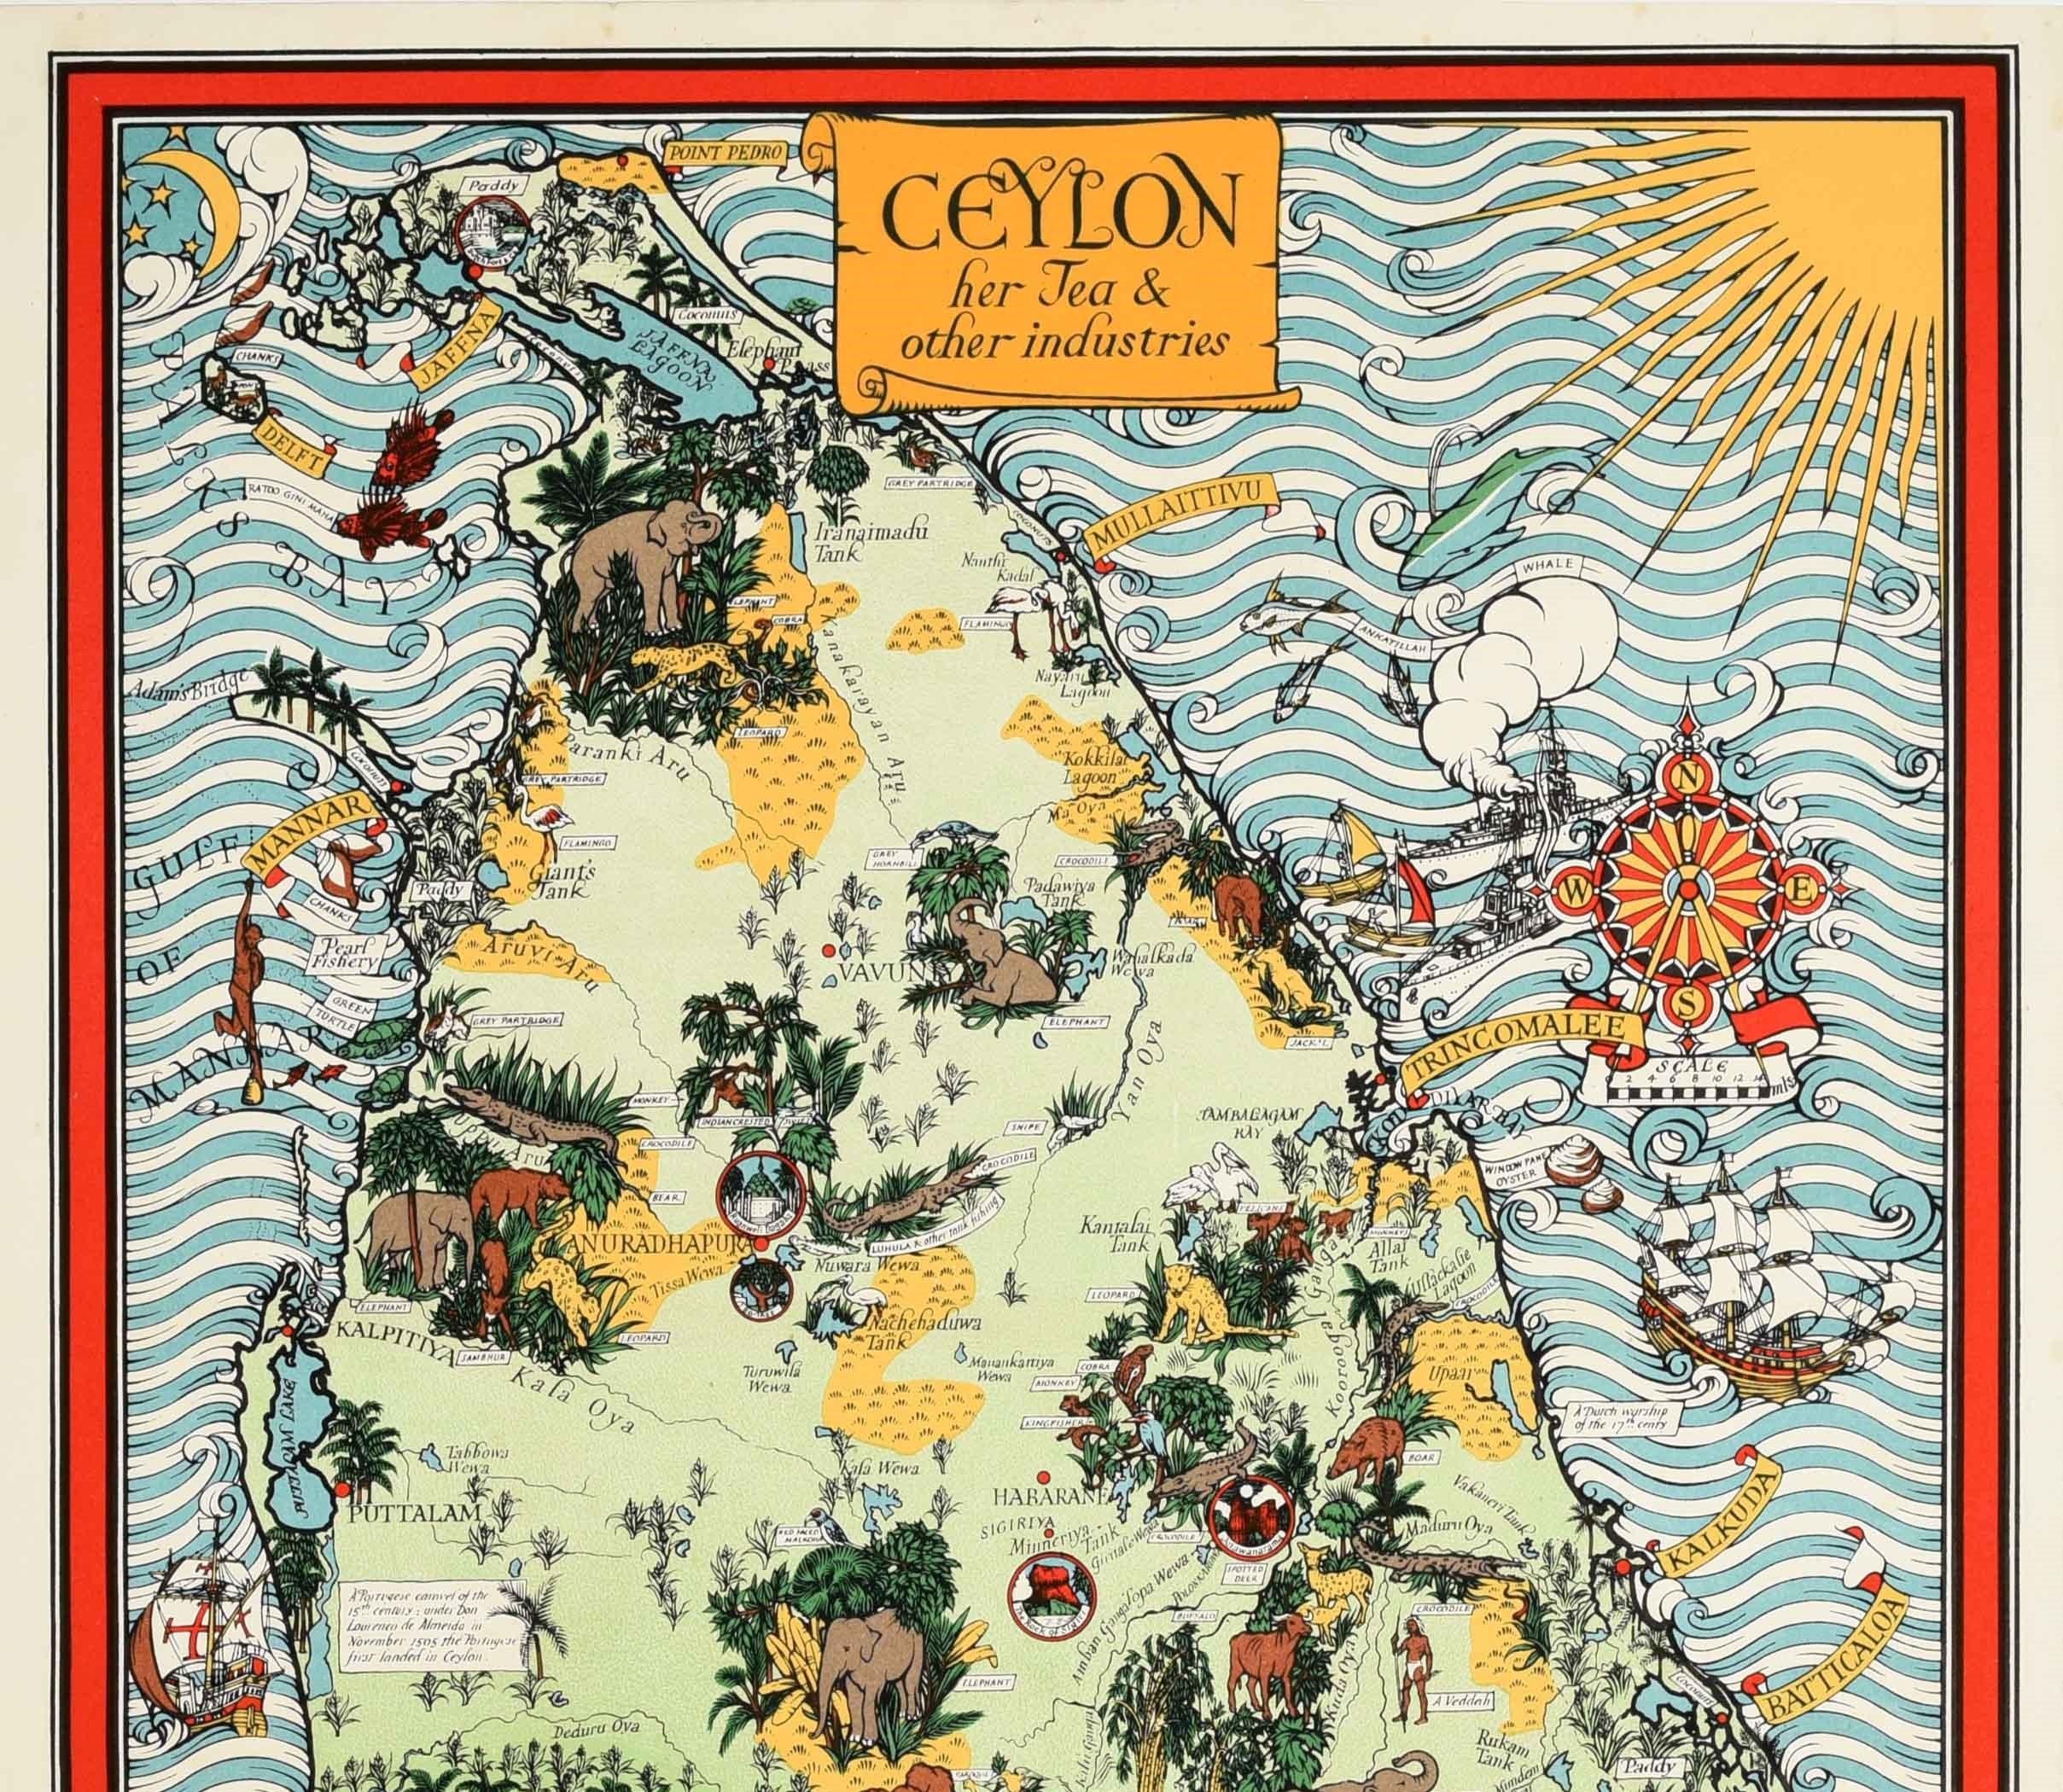 Original vintage pictorial map poster for Ceylon Her Tea & Other Industries featuring artwork by the notable British cartographer, graphic designer and artist Leslie MacDonald 